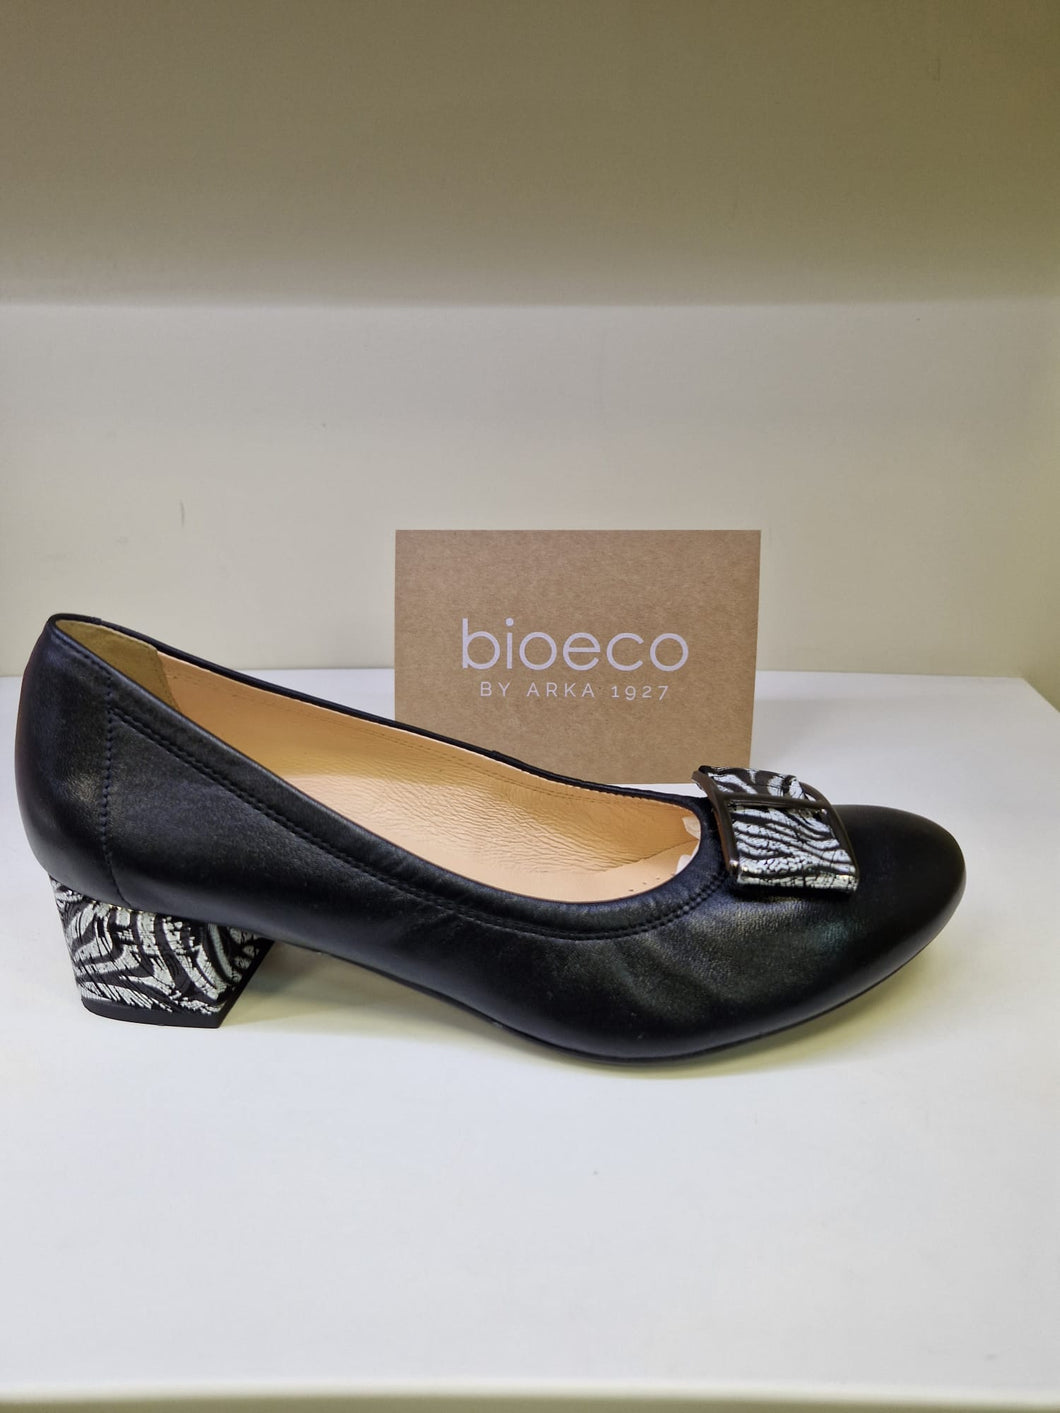 Bioeco Ladies Low Heel Court - Black Leather with Accent Details On Heel and Trim - 5632